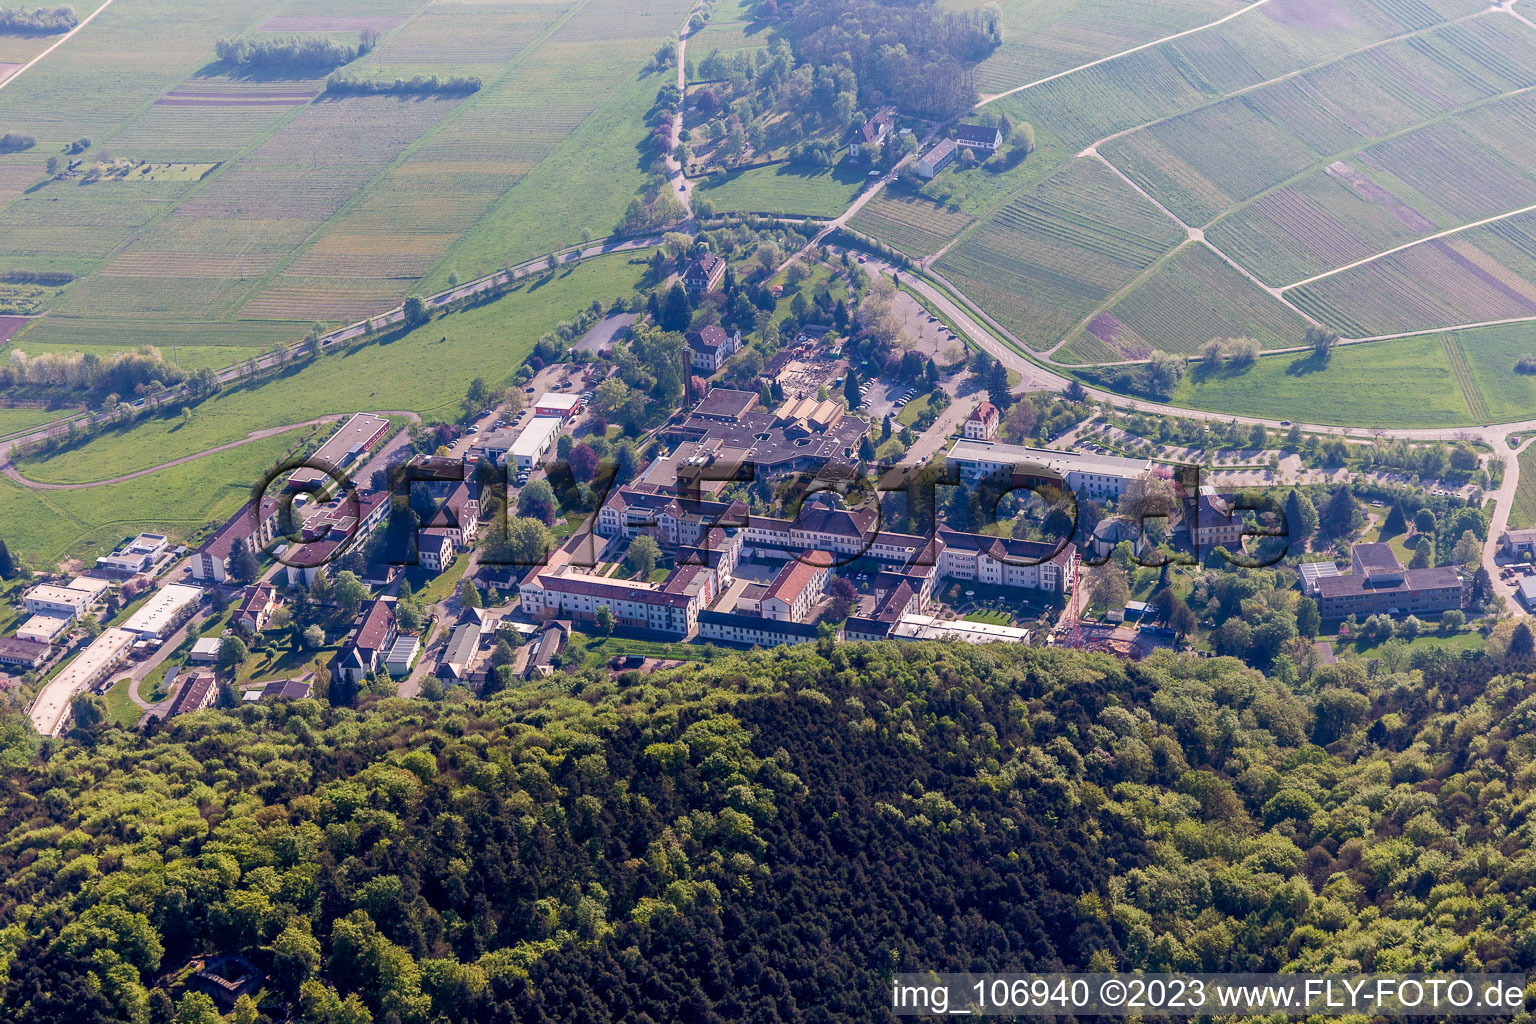 Klingenmünster in the state Rhineland-Palatinate, Germany from a drone